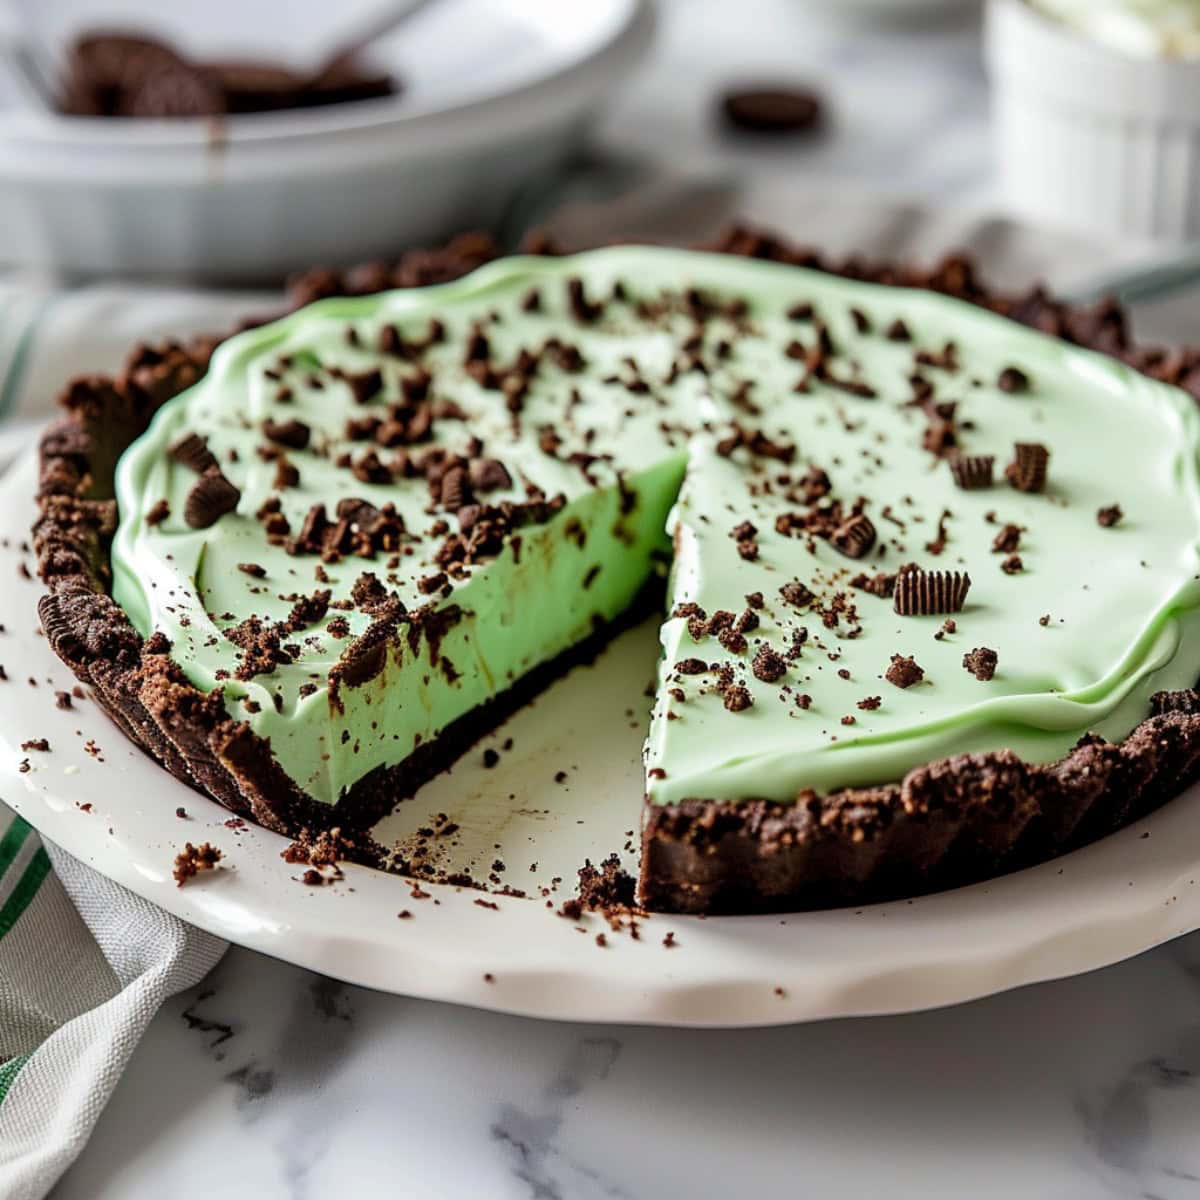 Whole Grasshopper Pie with a slice removed